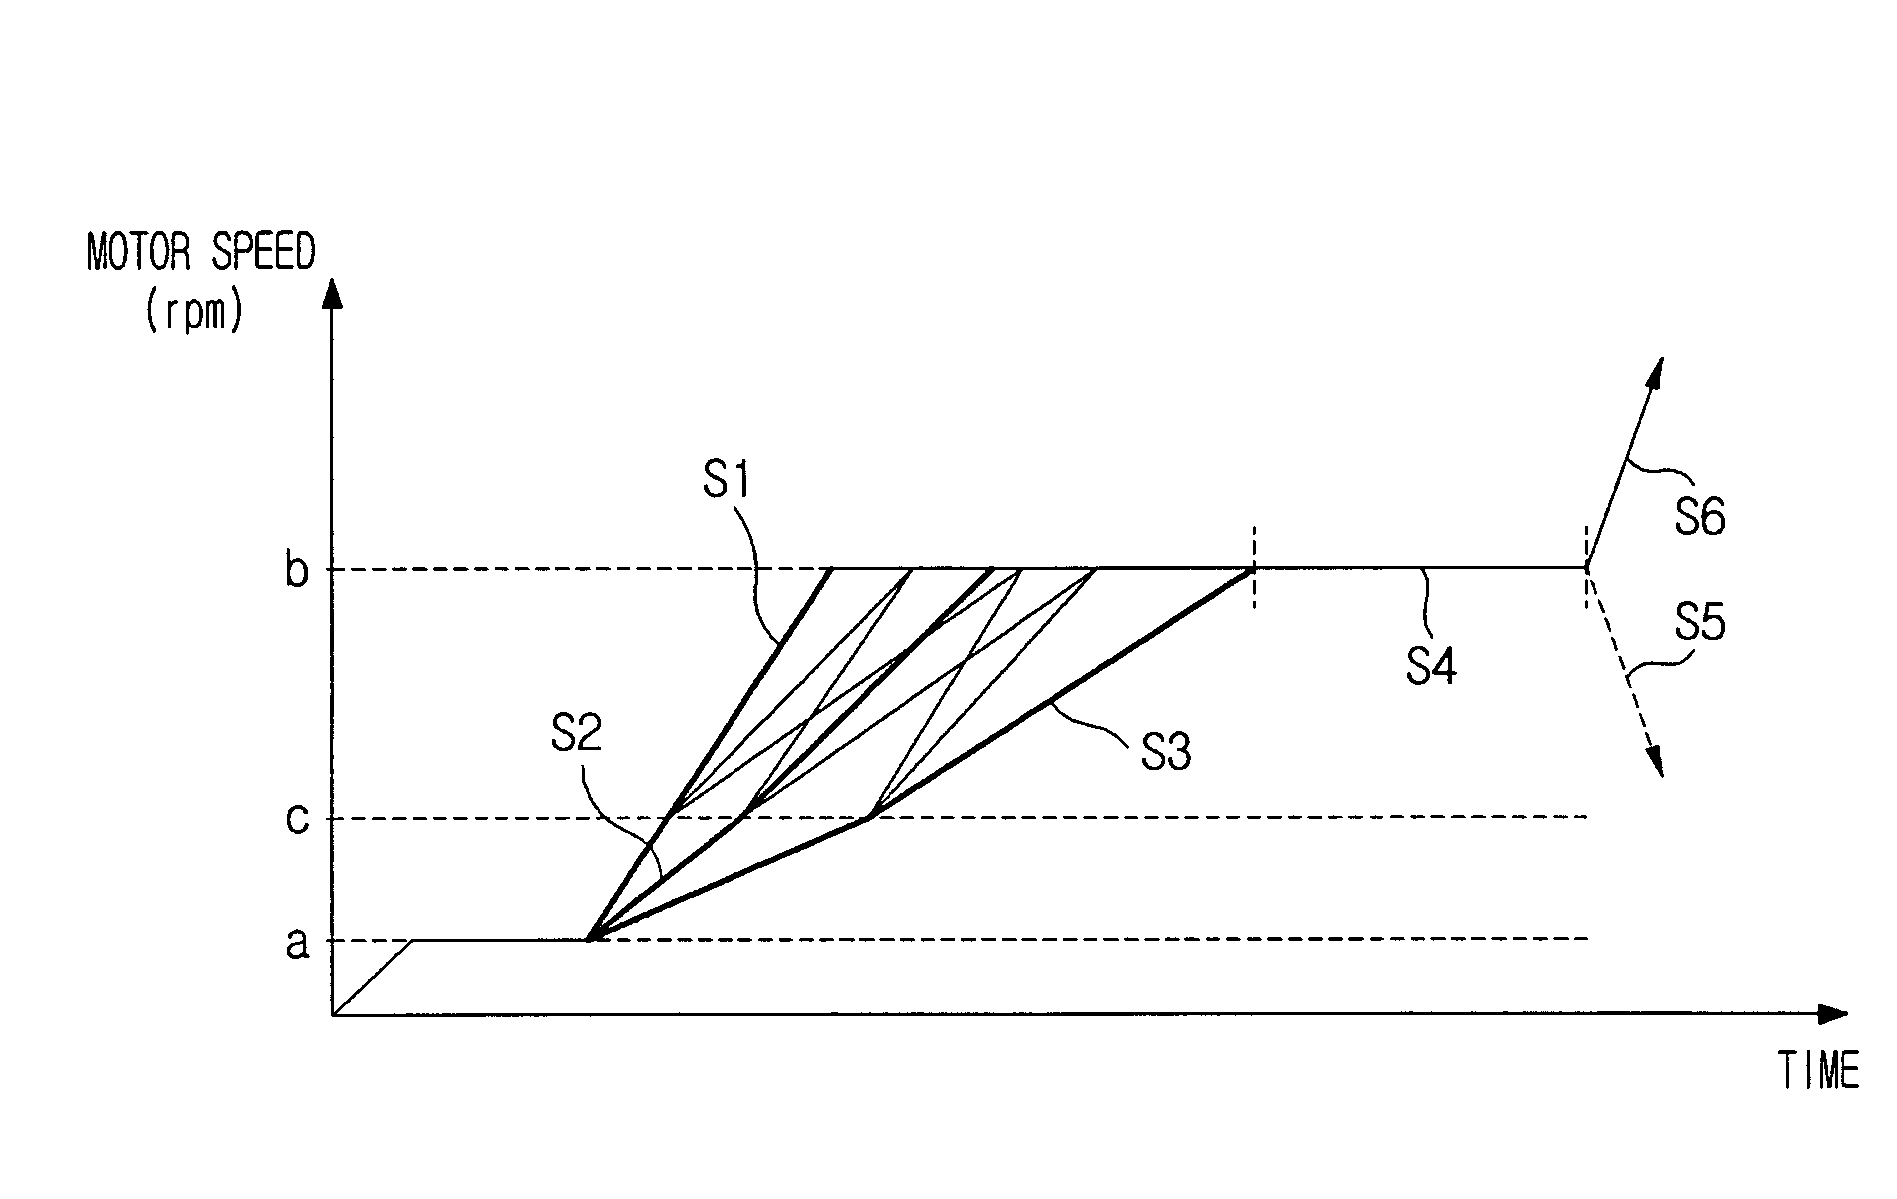 Method for controlling and sensing an unbalance condition based on sensed laundry weight